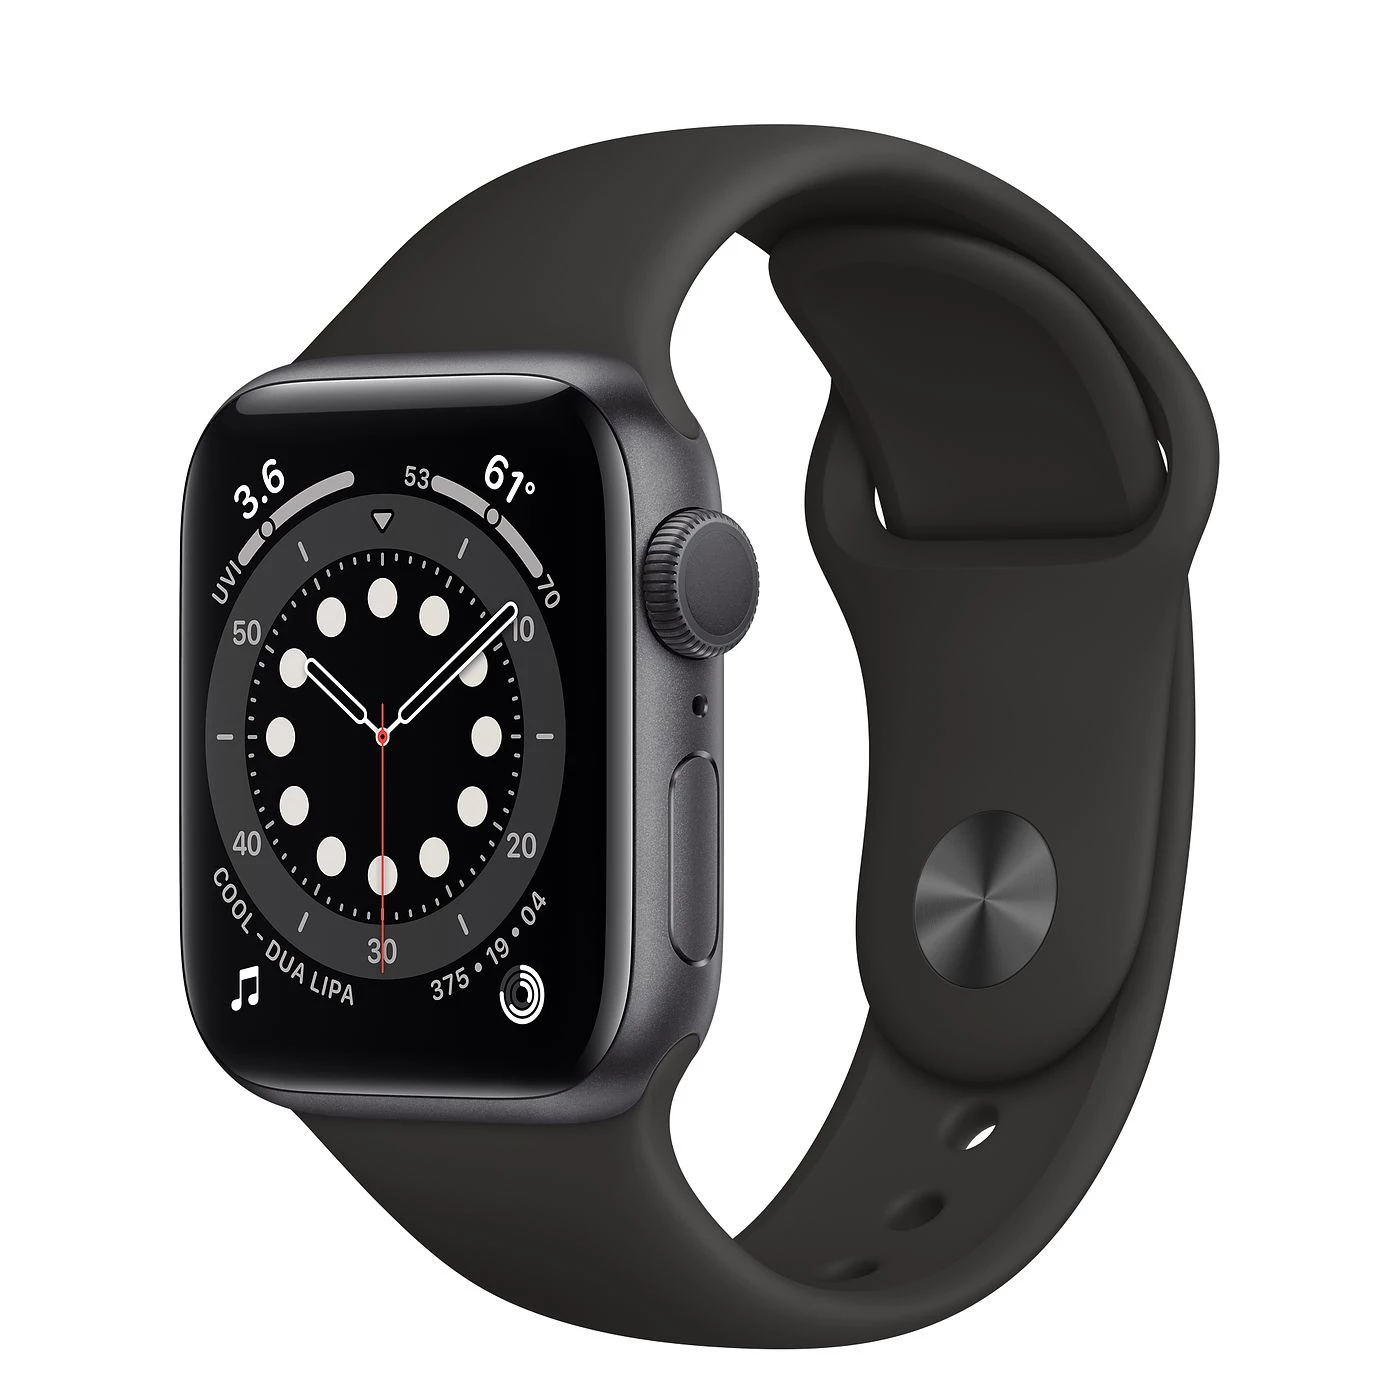 Apple Watch Series 6 GPS 40mm Space Gray Aluminum Case with Black Sport Band (MG133)